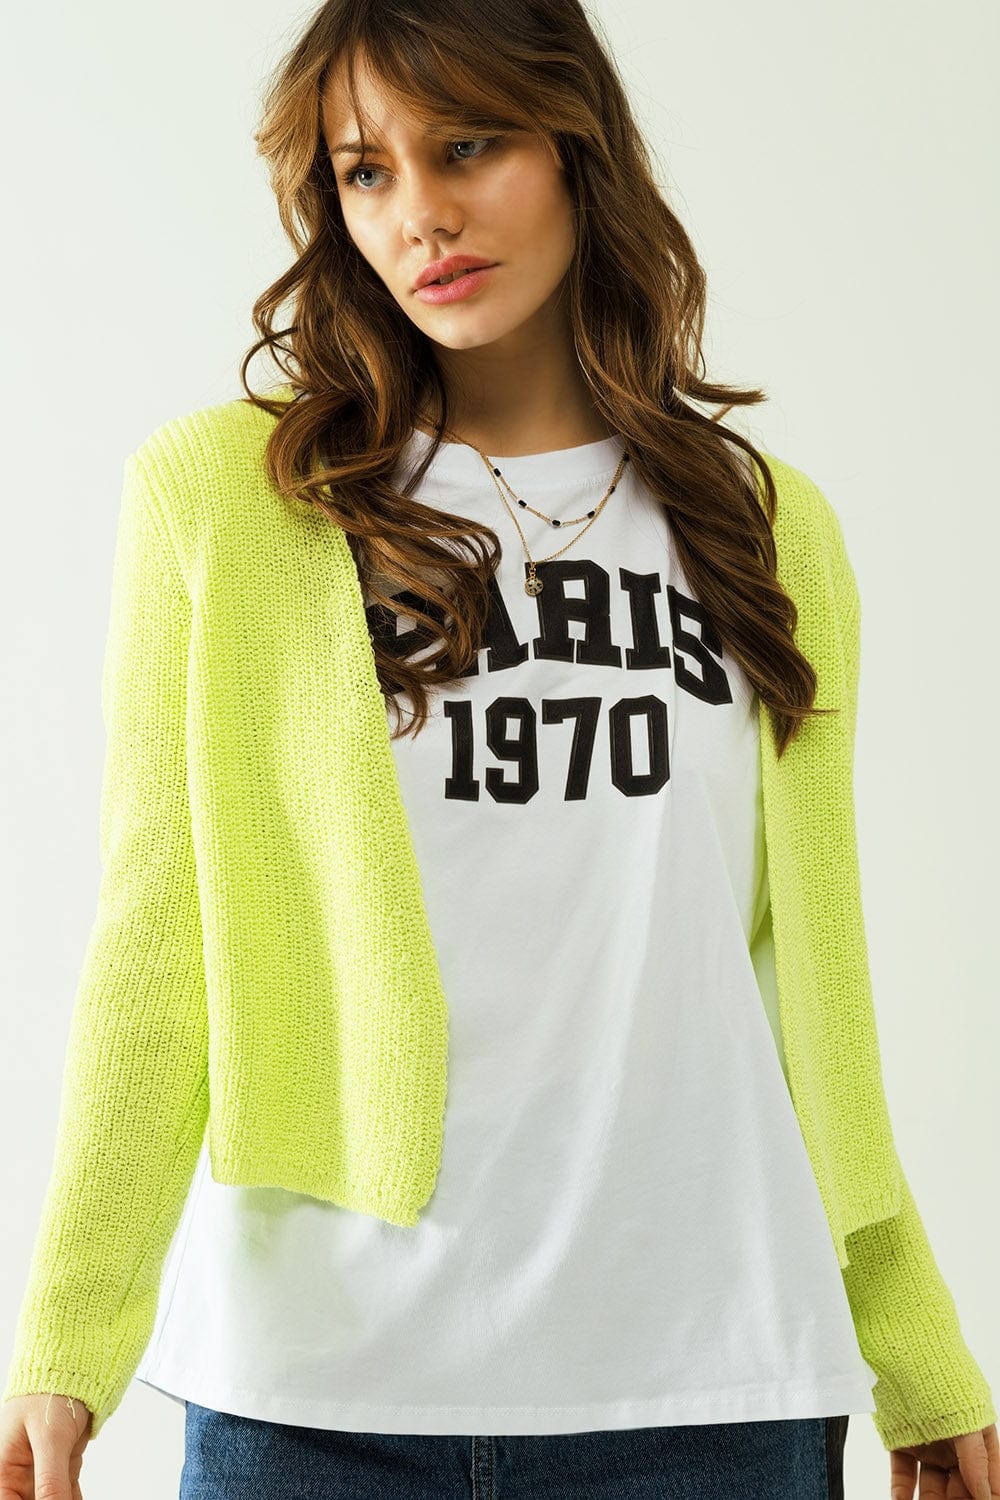 Q2 Women's Sweater Short Yellow Knit Cardigan With Long Sleeves